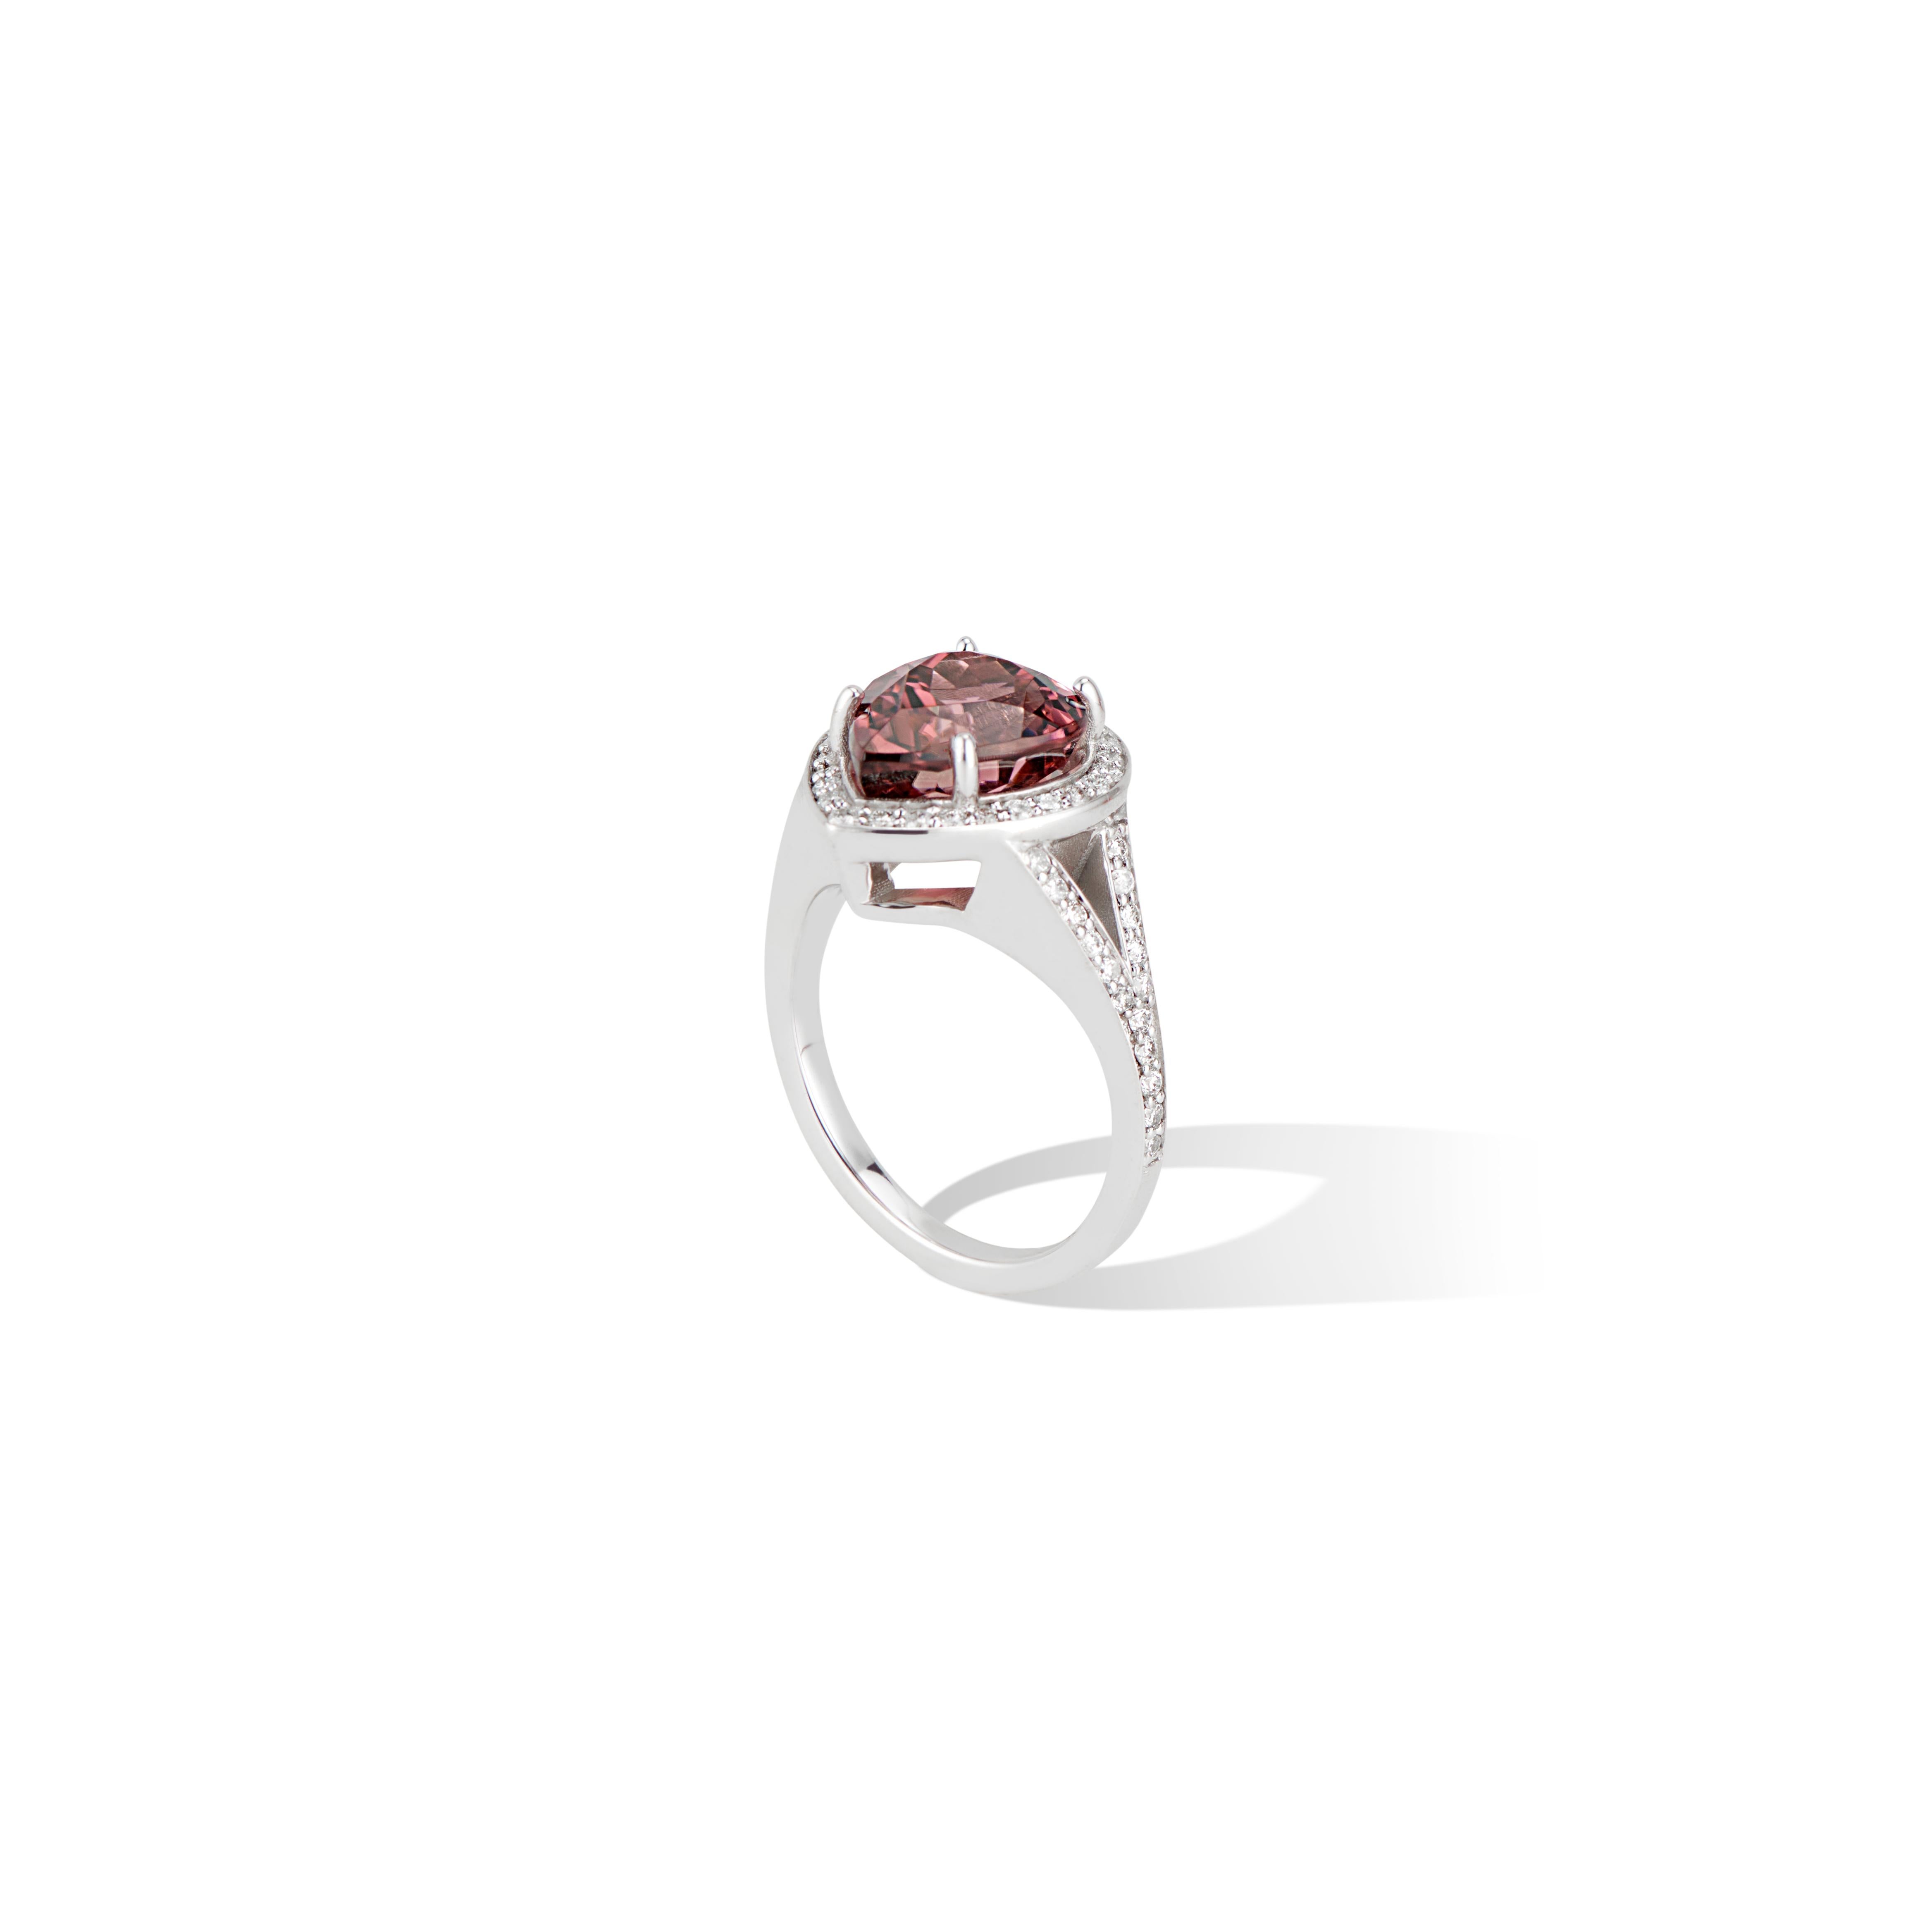 A stunning split shank style ring, with a scintillating halo of brilliant diamonds surrounding a striking pink pear tourmaline center and continuous sparkling pave set band.

A large 4.43 carat tourmaline and very unique shade of pink creates this